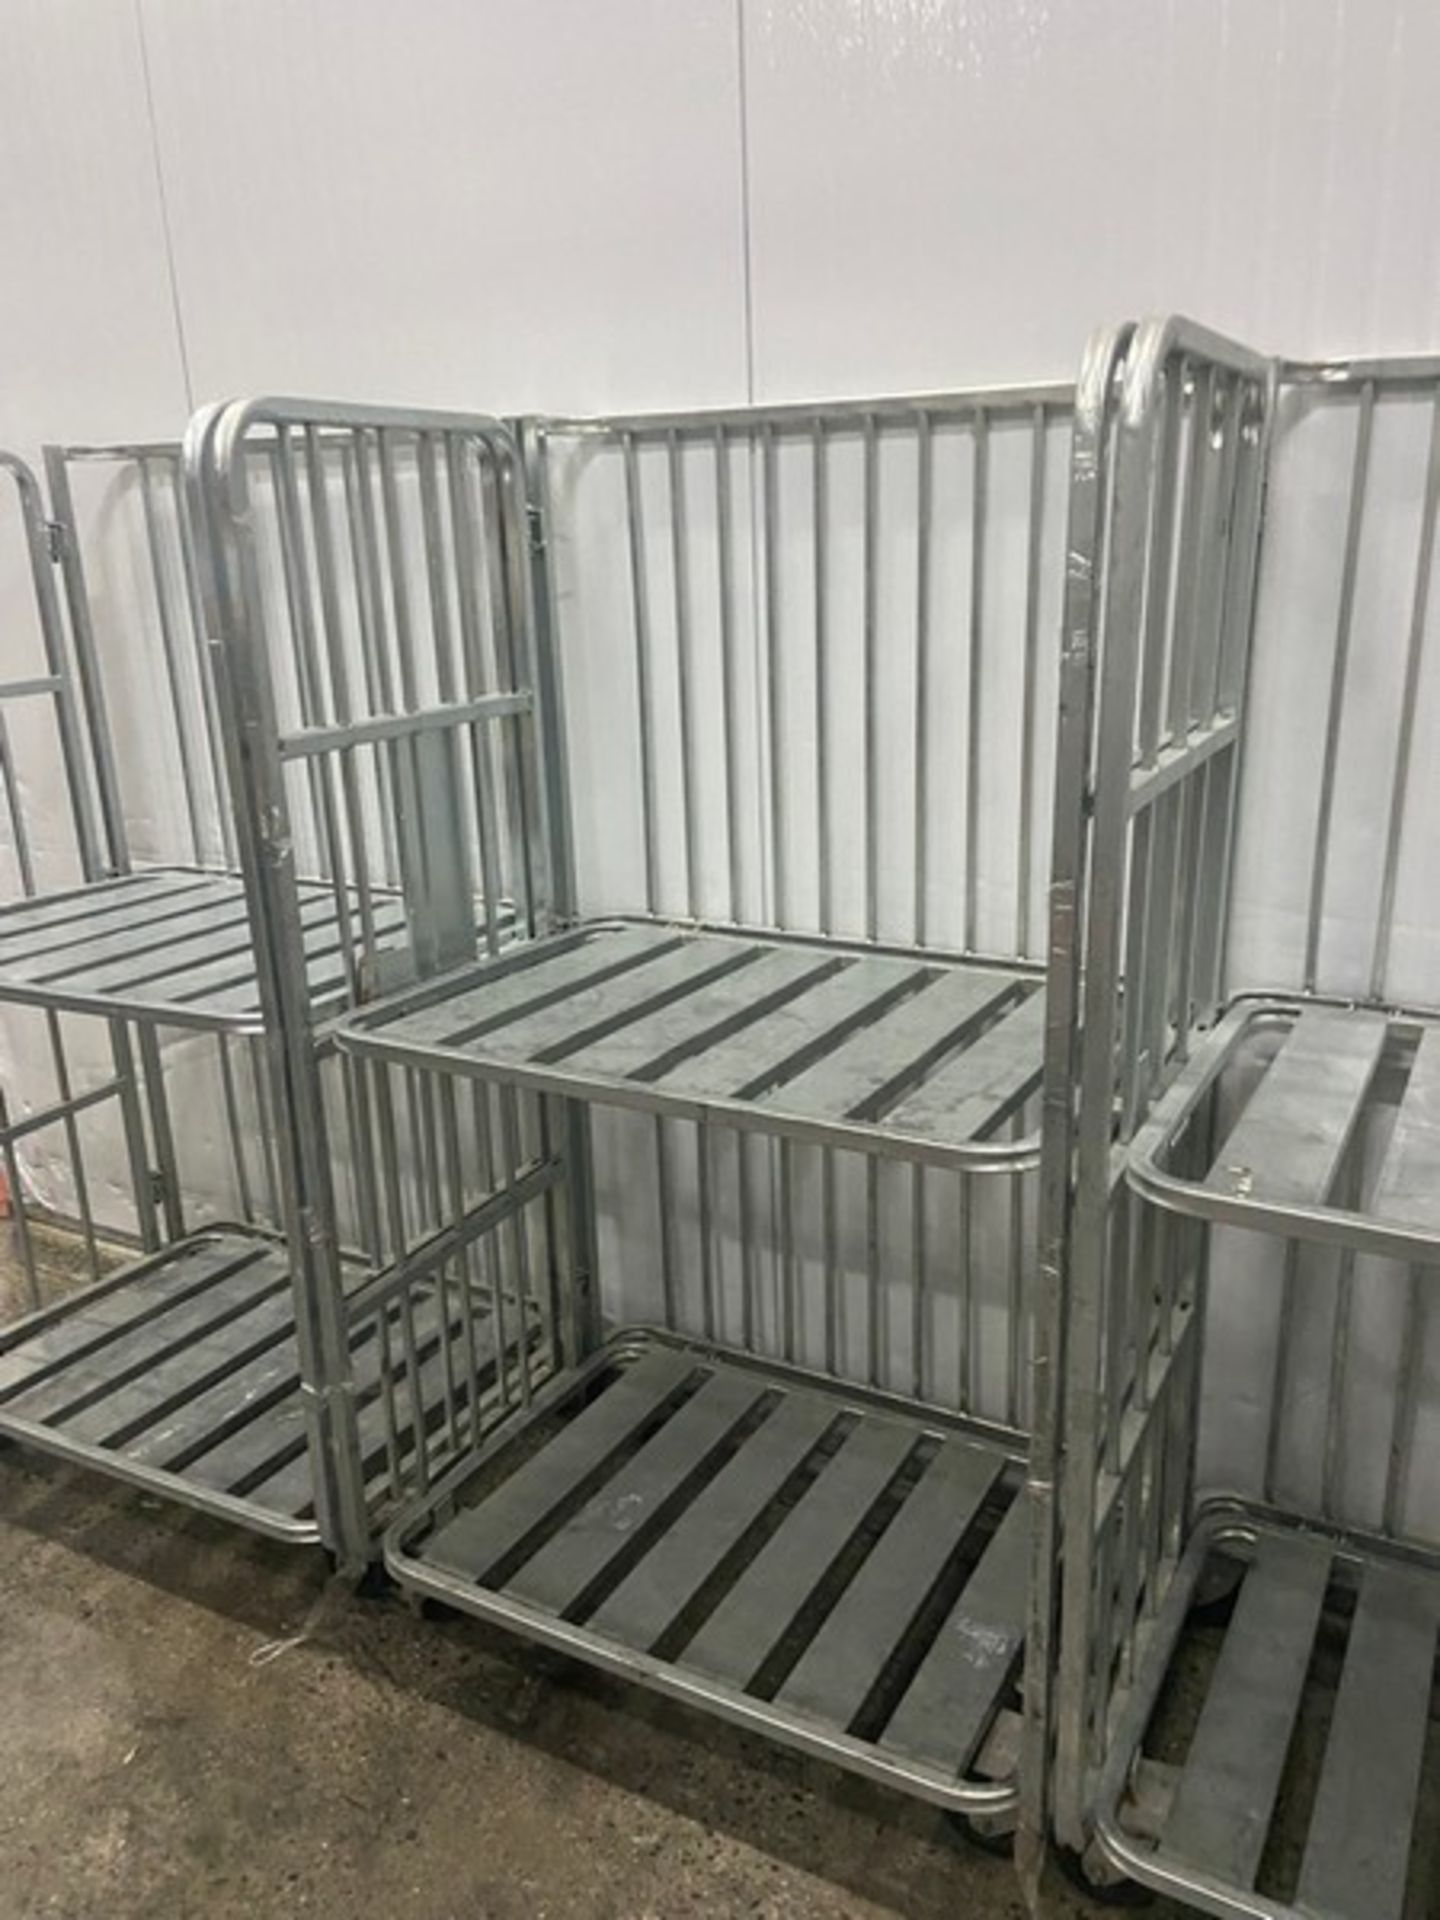 (3) Aluminum 2-Level Cage Carts, Overall Dims.: Aprox. 39" L x 29" W x 68-1/2" H (LOCATED IN RED - Image 3 of 3